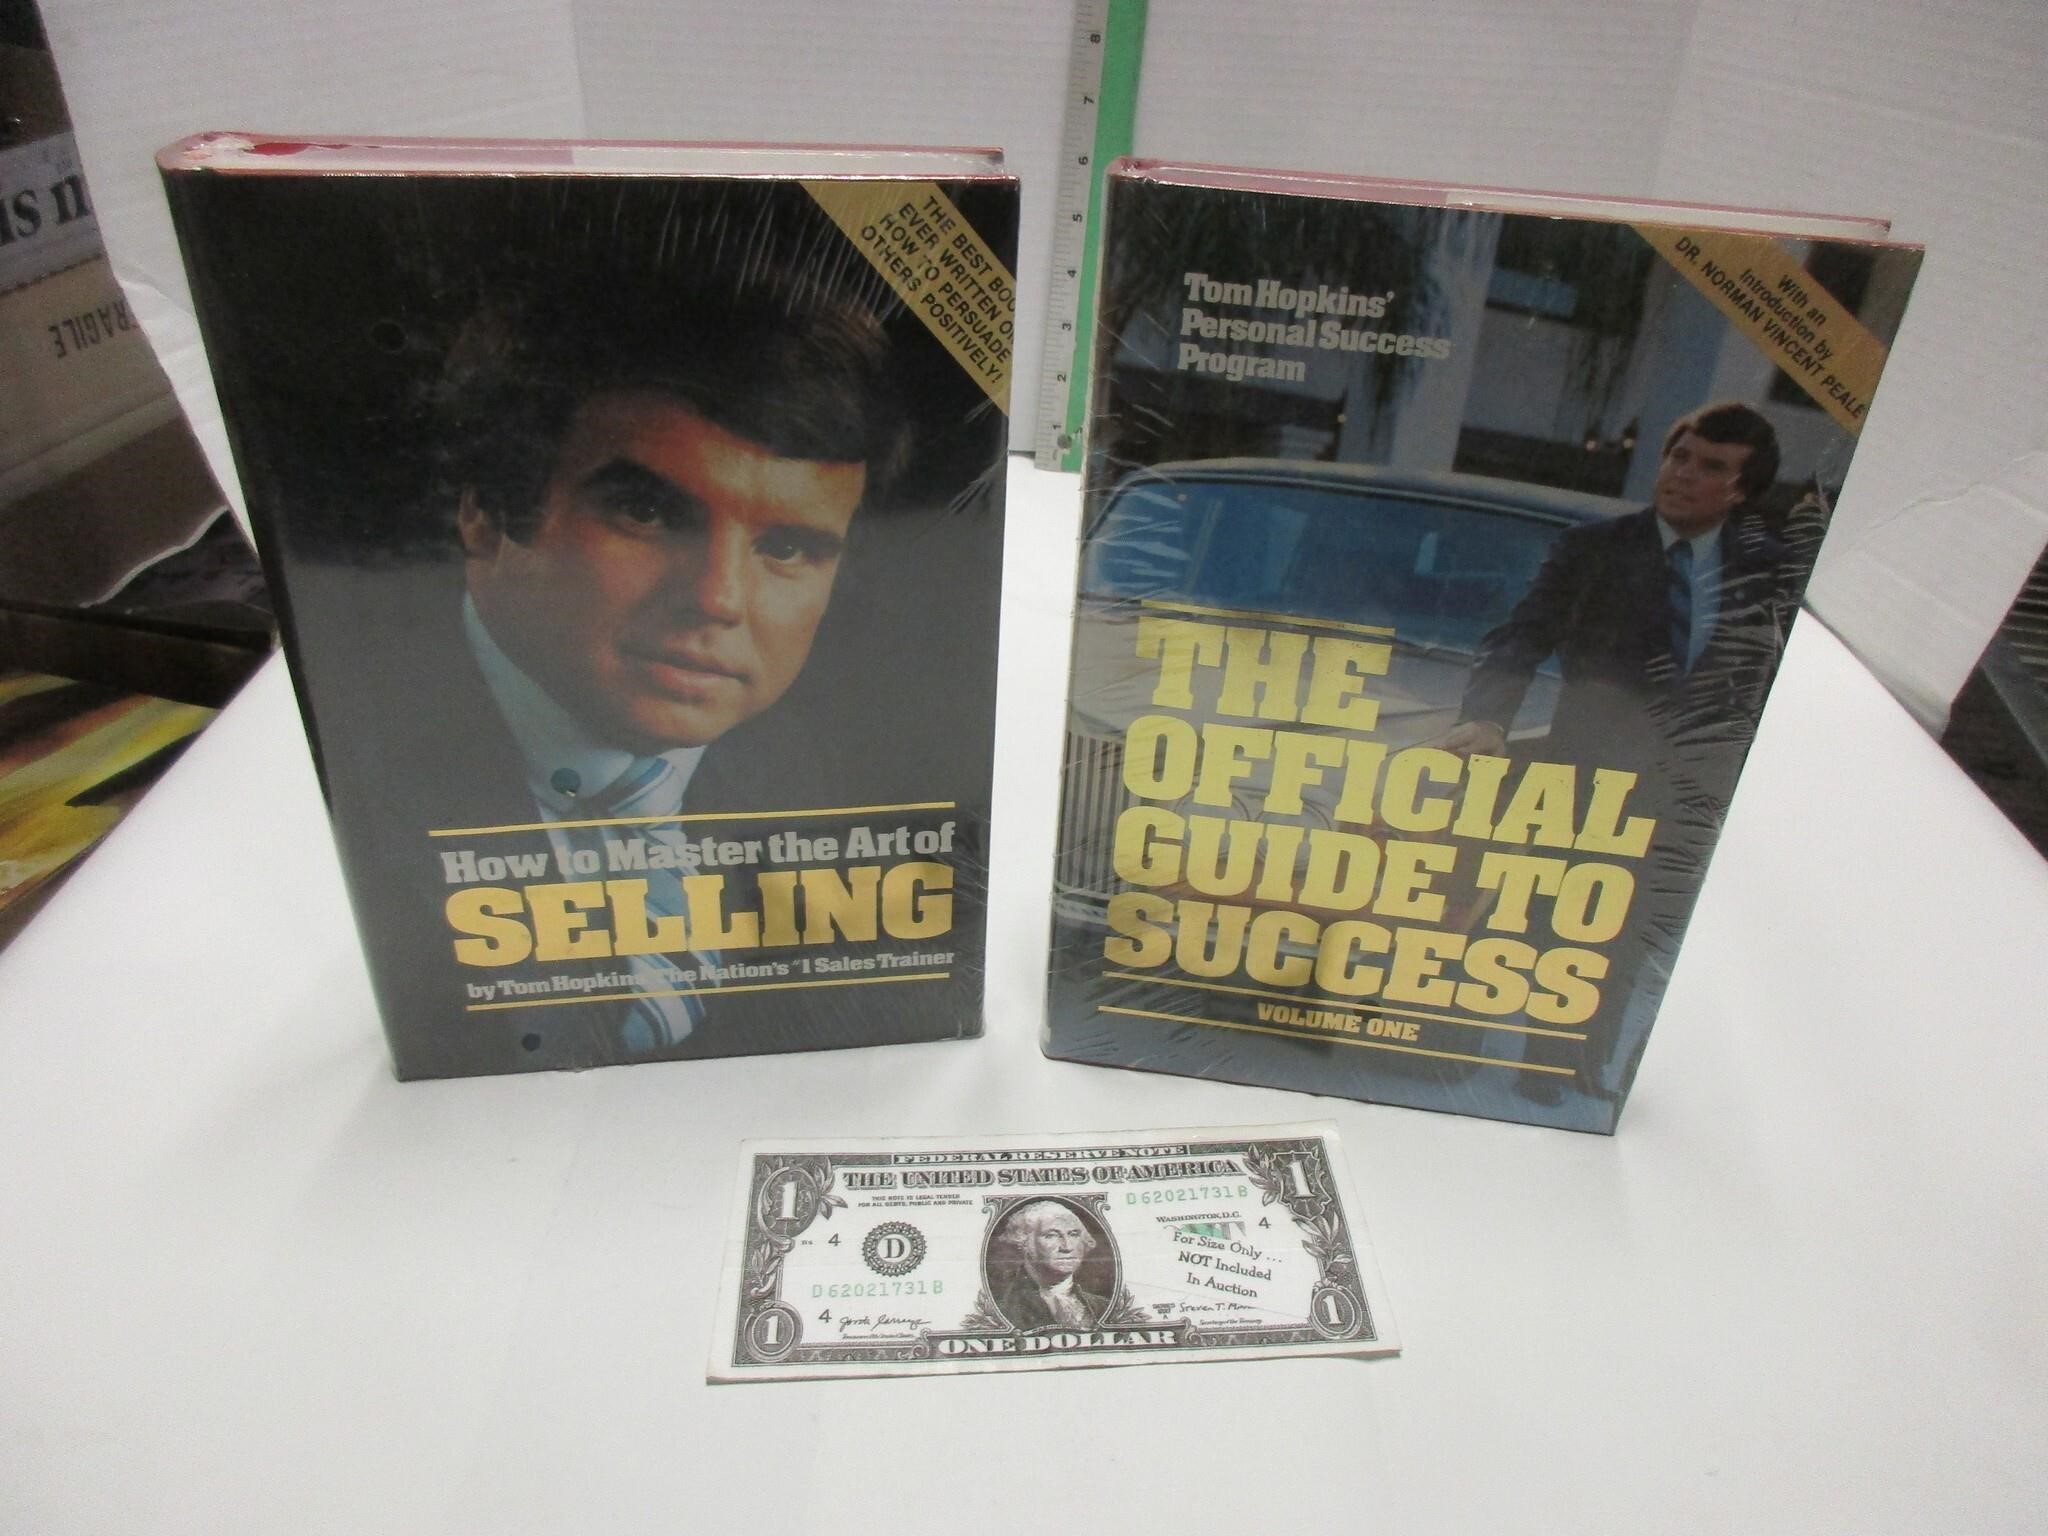 $Deal Two new books on business